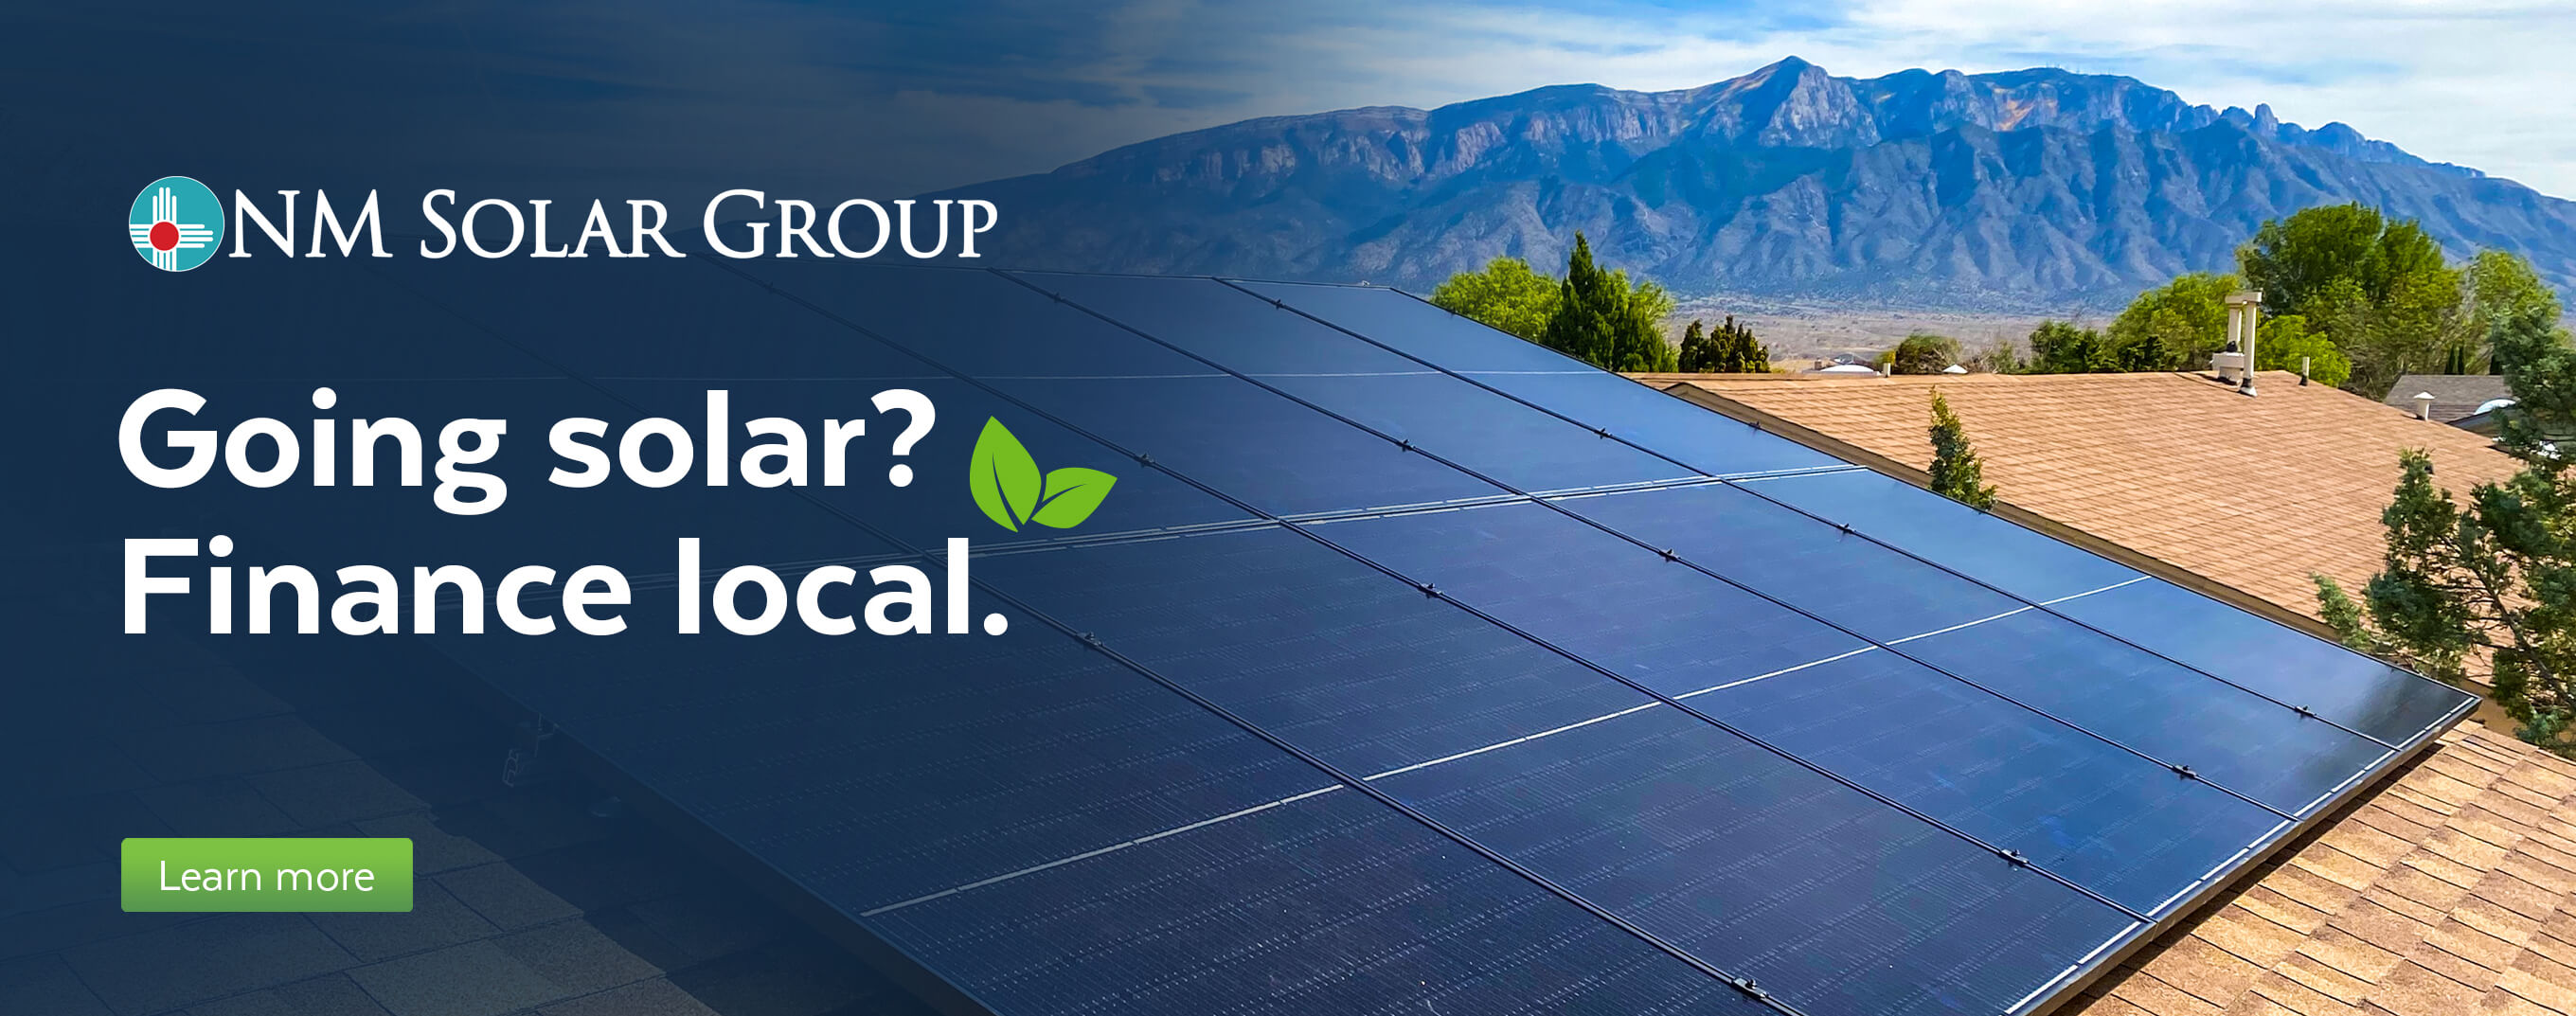 NM Solar Group - Going solar? Finance local. - Learn More